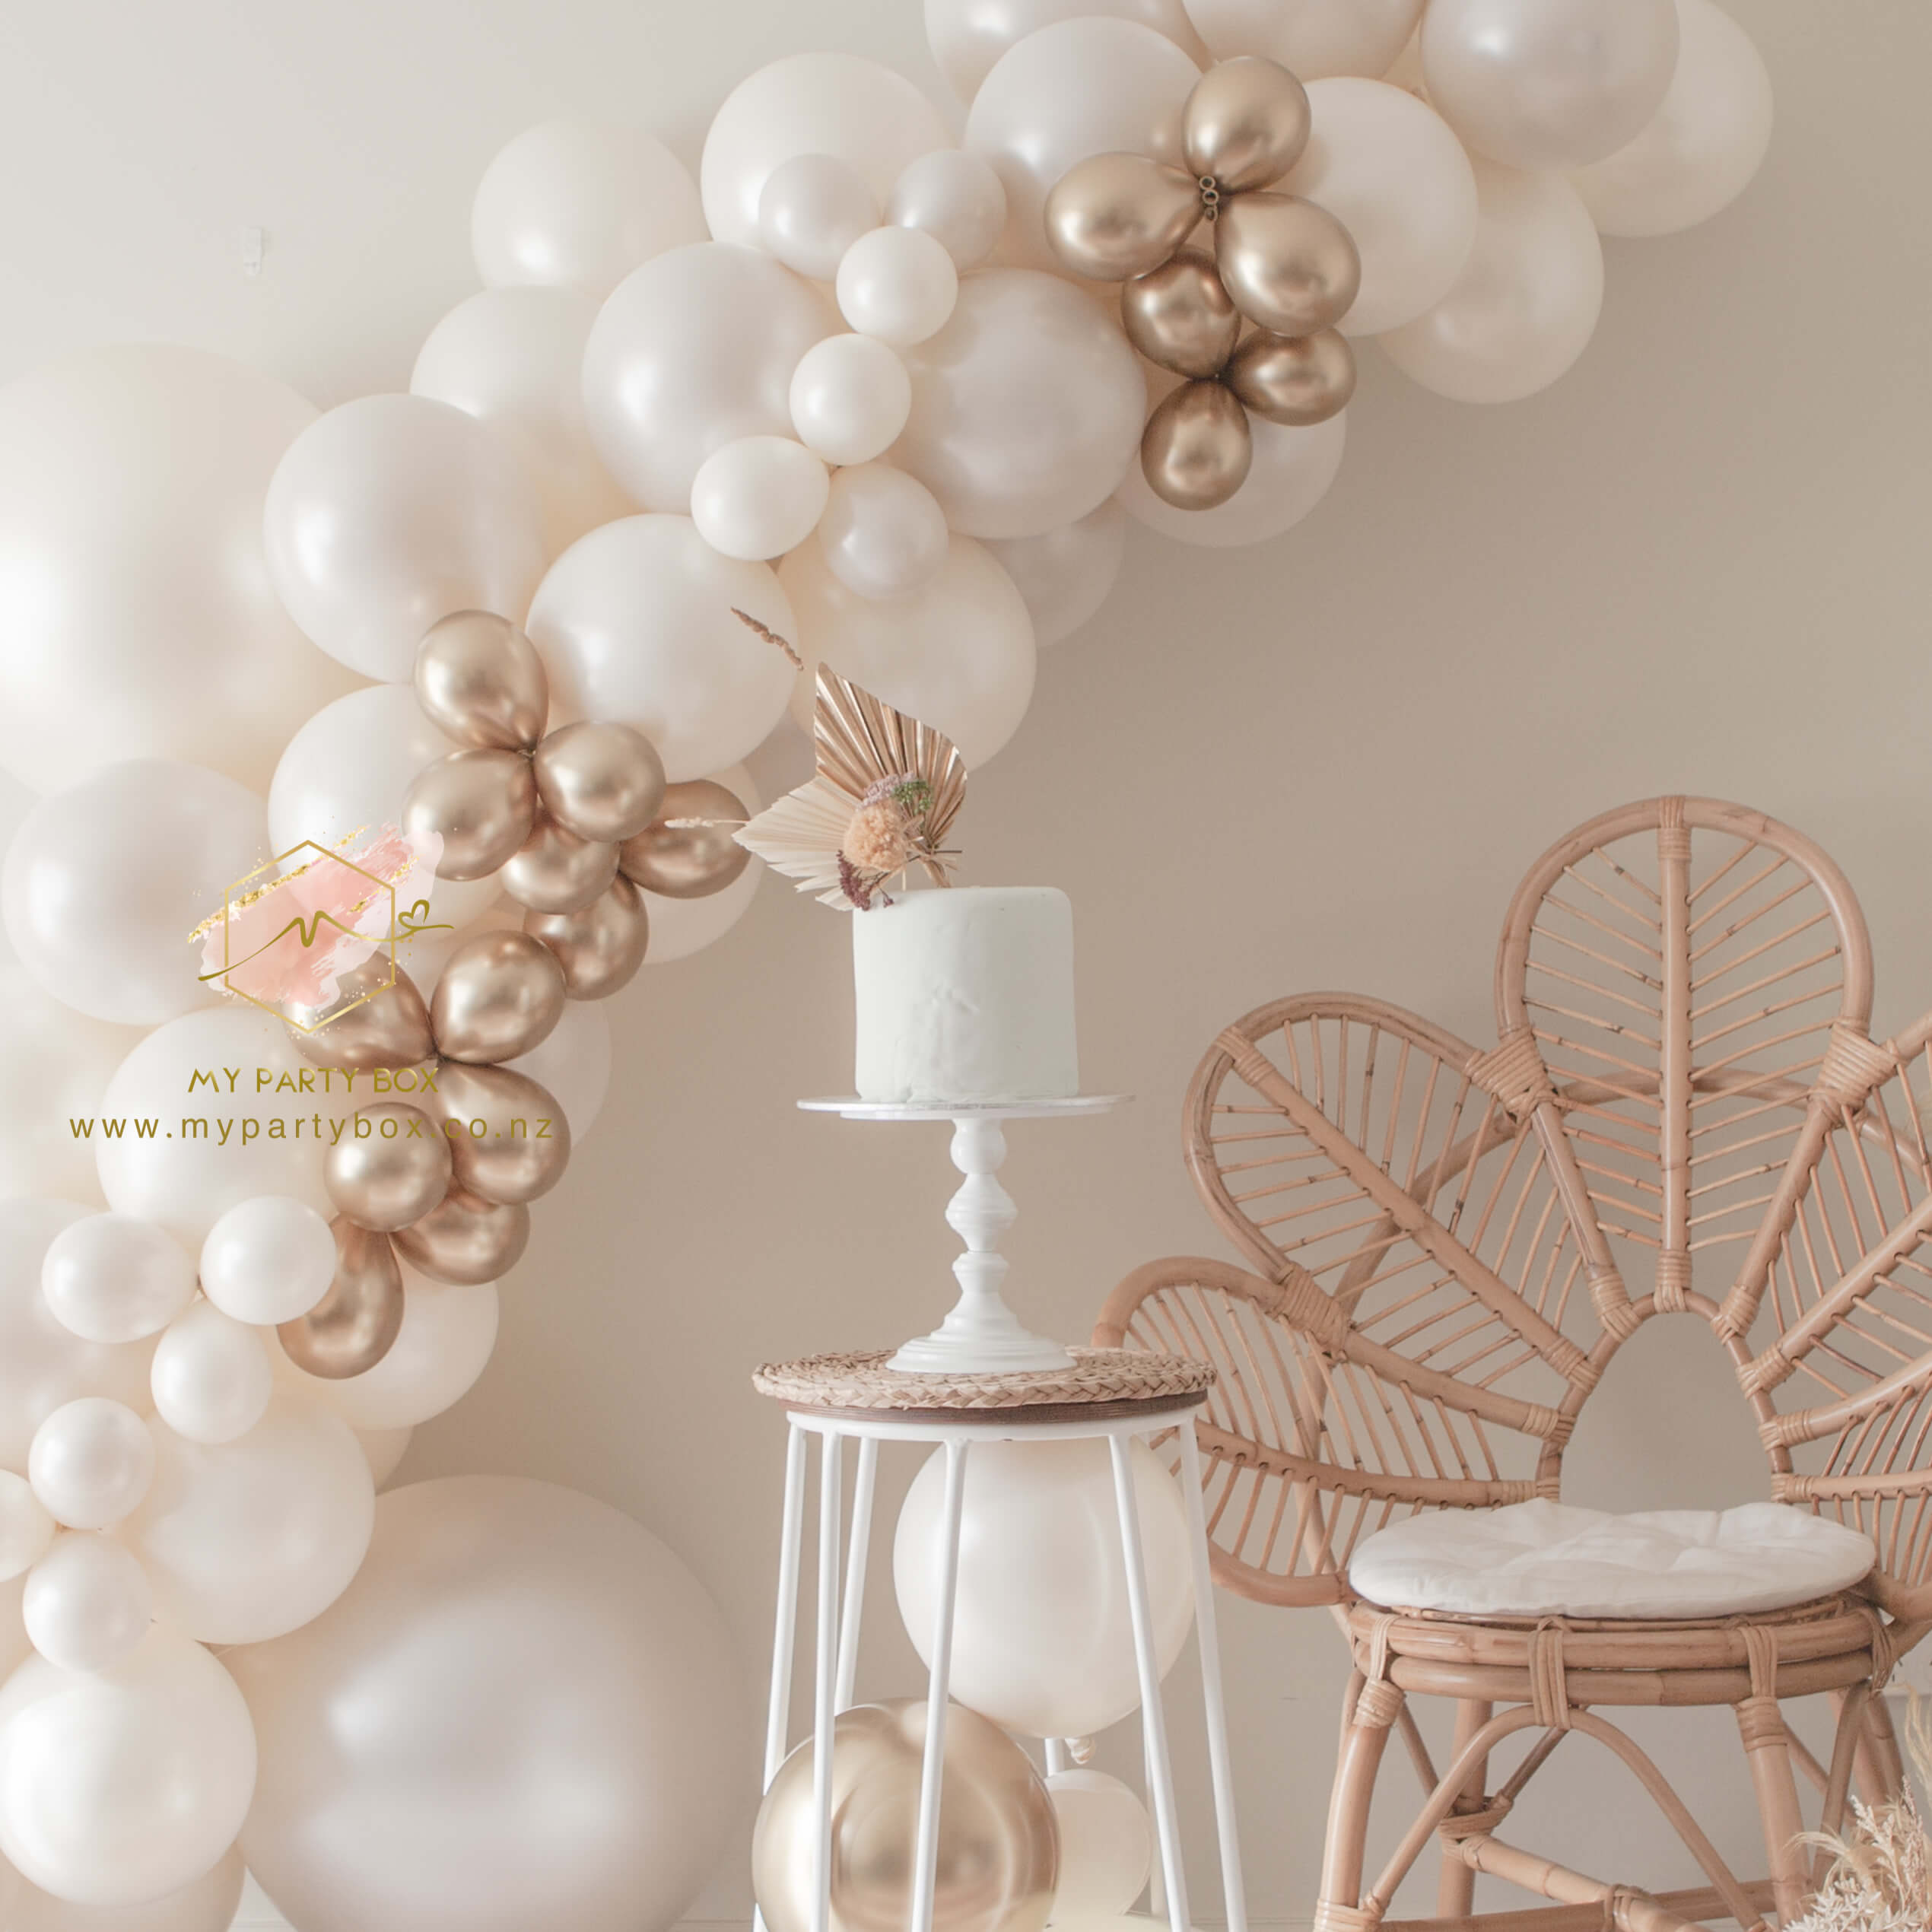 My Party Box Milestone Birthday Balloon Garland DIY Kit - Pearl in the Sea with Pearl Ivory & Pearl whitesand